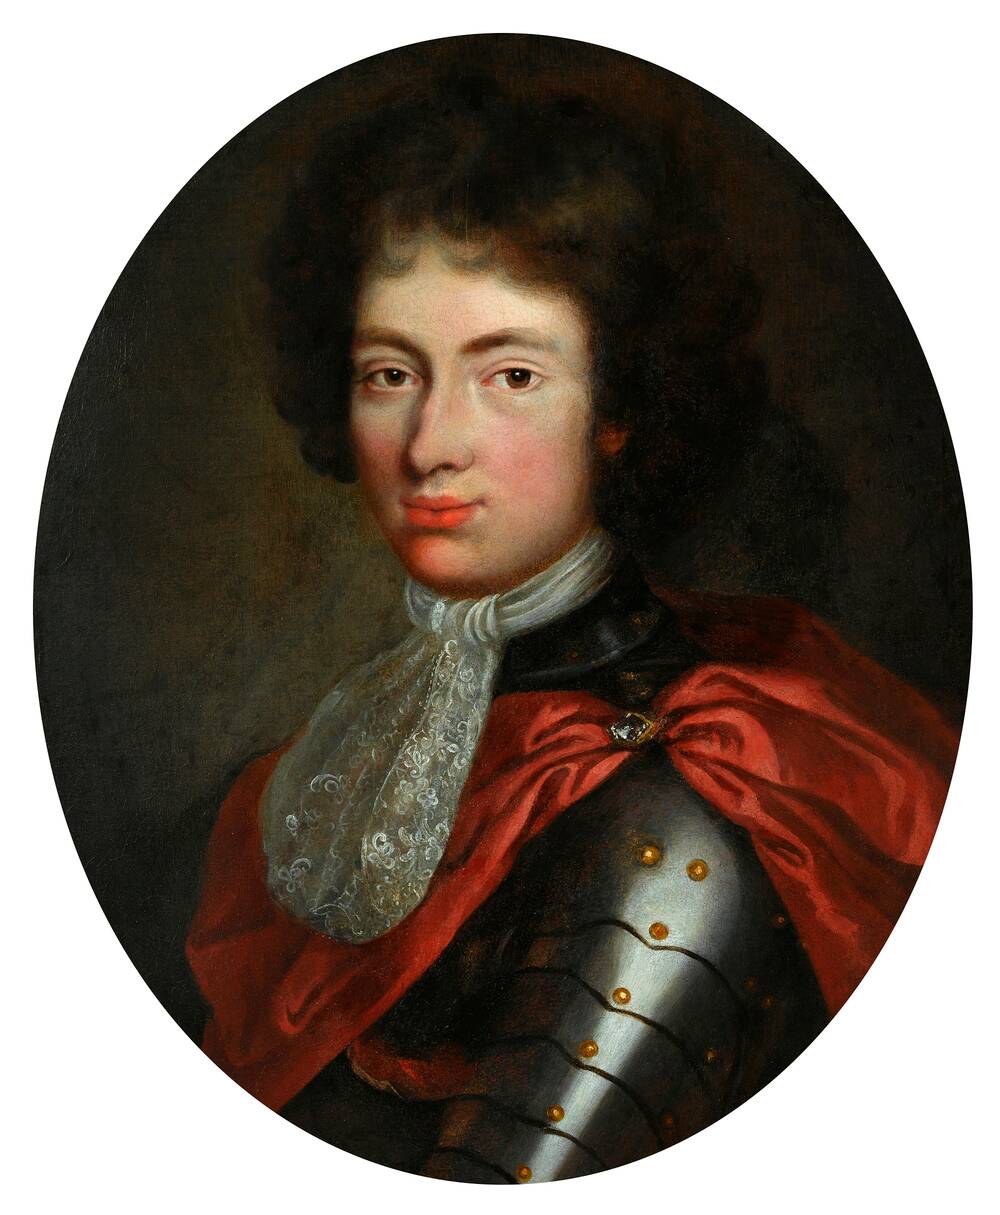 A half-portrait of a young 17th-century man, with dark curly hair. He wears fitted armour with a red satin cape over the top. He also has a lacy neck tie.